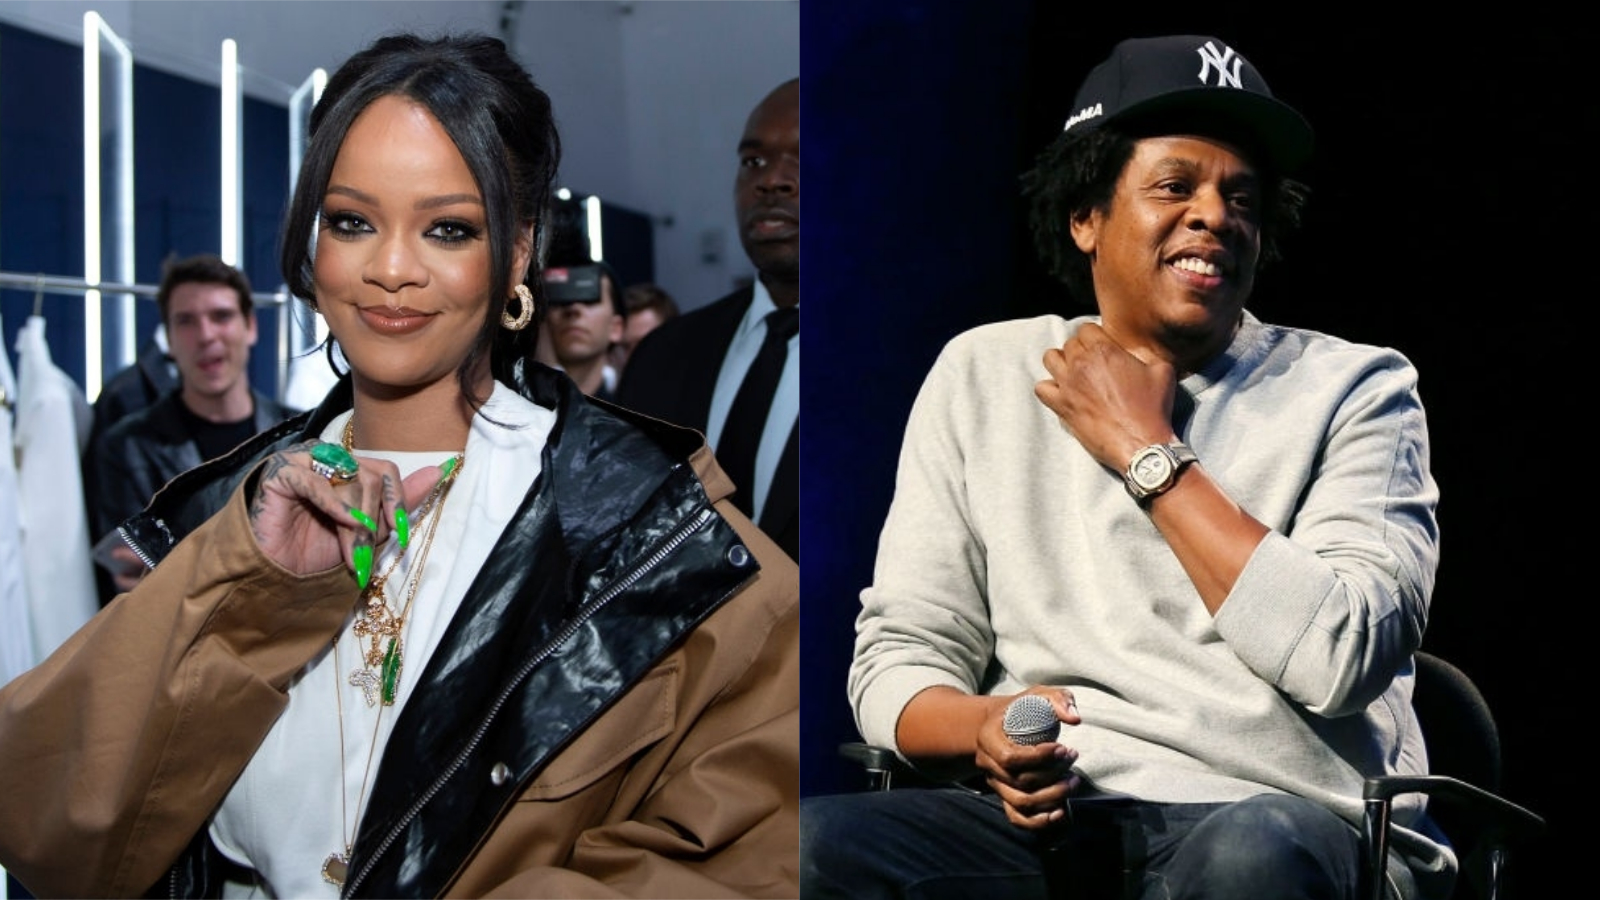 Rihanna And Jay-Z's Foundations Give $2 Million To Fund COVID-19 Relief In LA And NYC